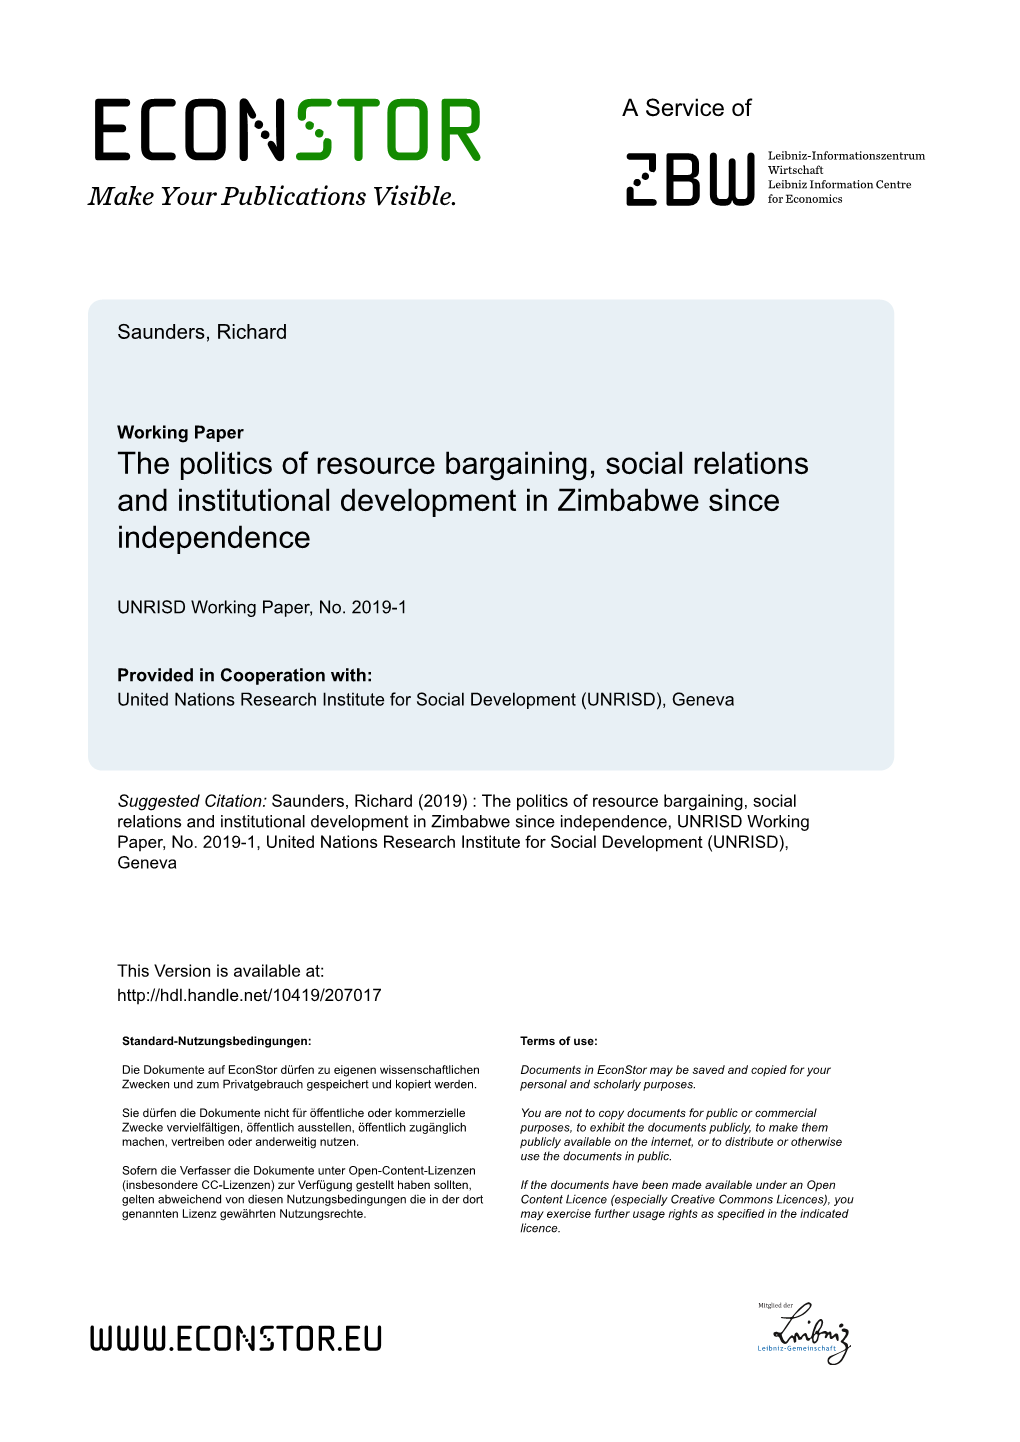 The Politics of Resource Bargaining, Social Relations and Institutional Development in Zimbabwe Since Independence